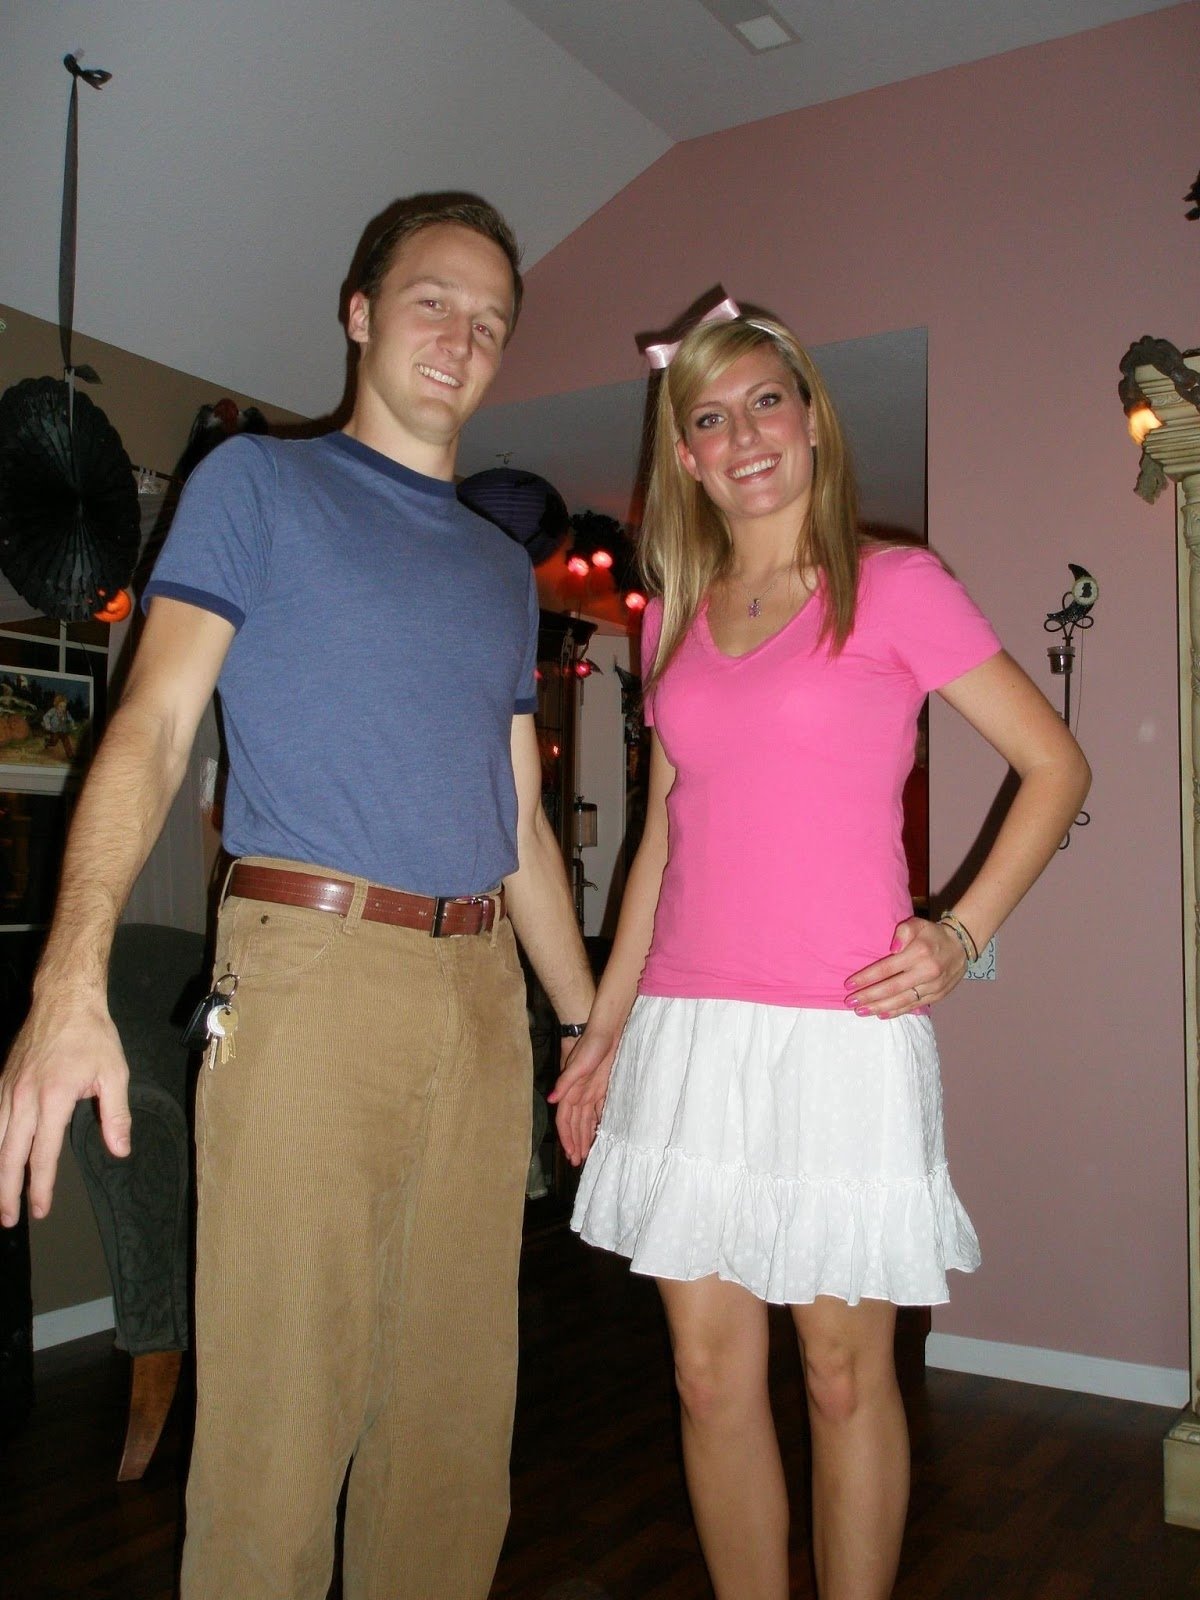 10 Trendy Couples Costume Ideas For Halloween 57 couples diy costumes top 10 tuesdays funny costumes halloween 2 2022